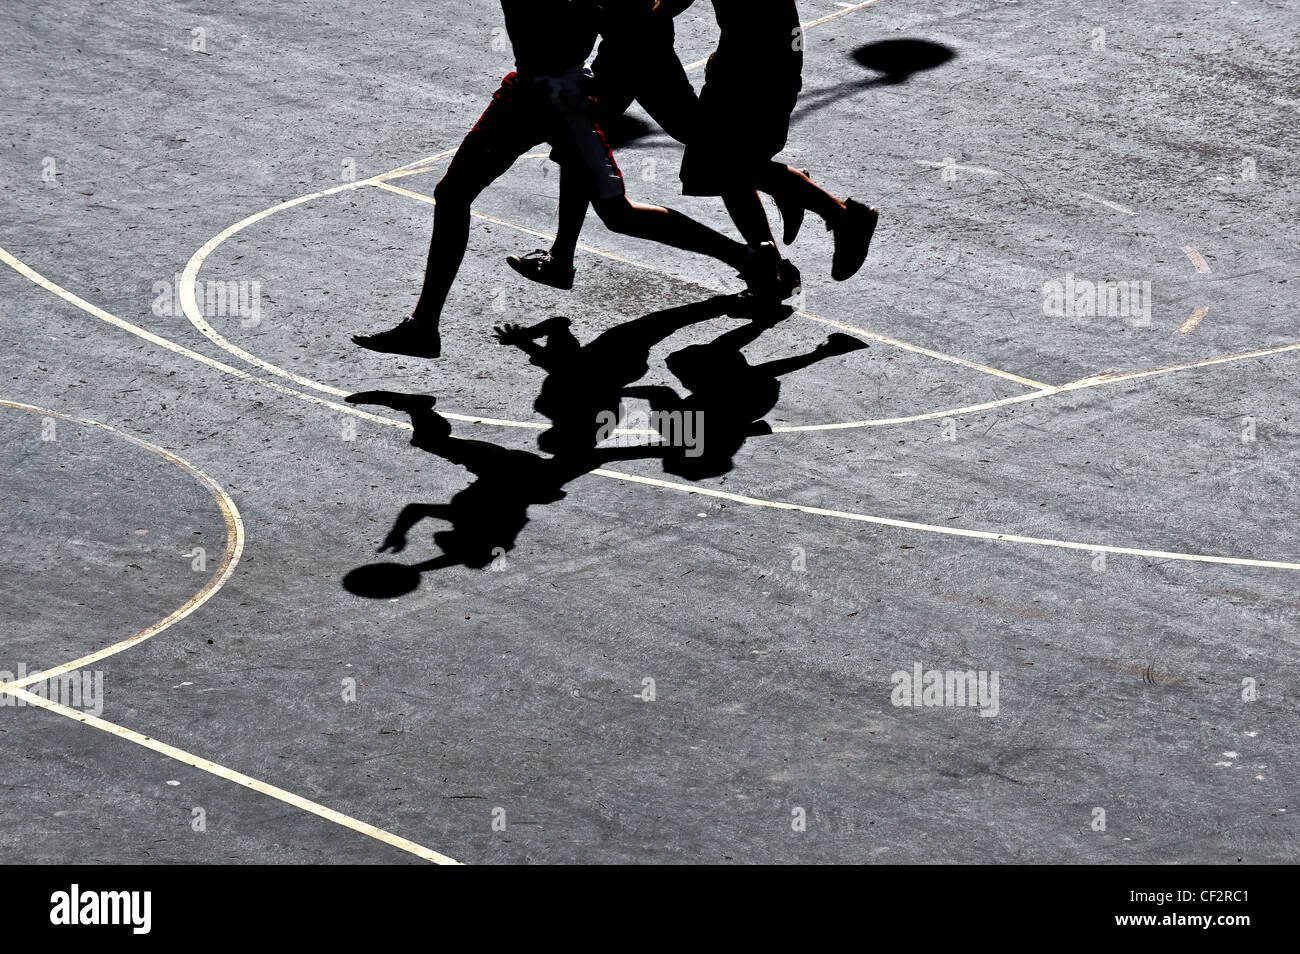 Shadows cast on a court by basketball players. Stock Photo